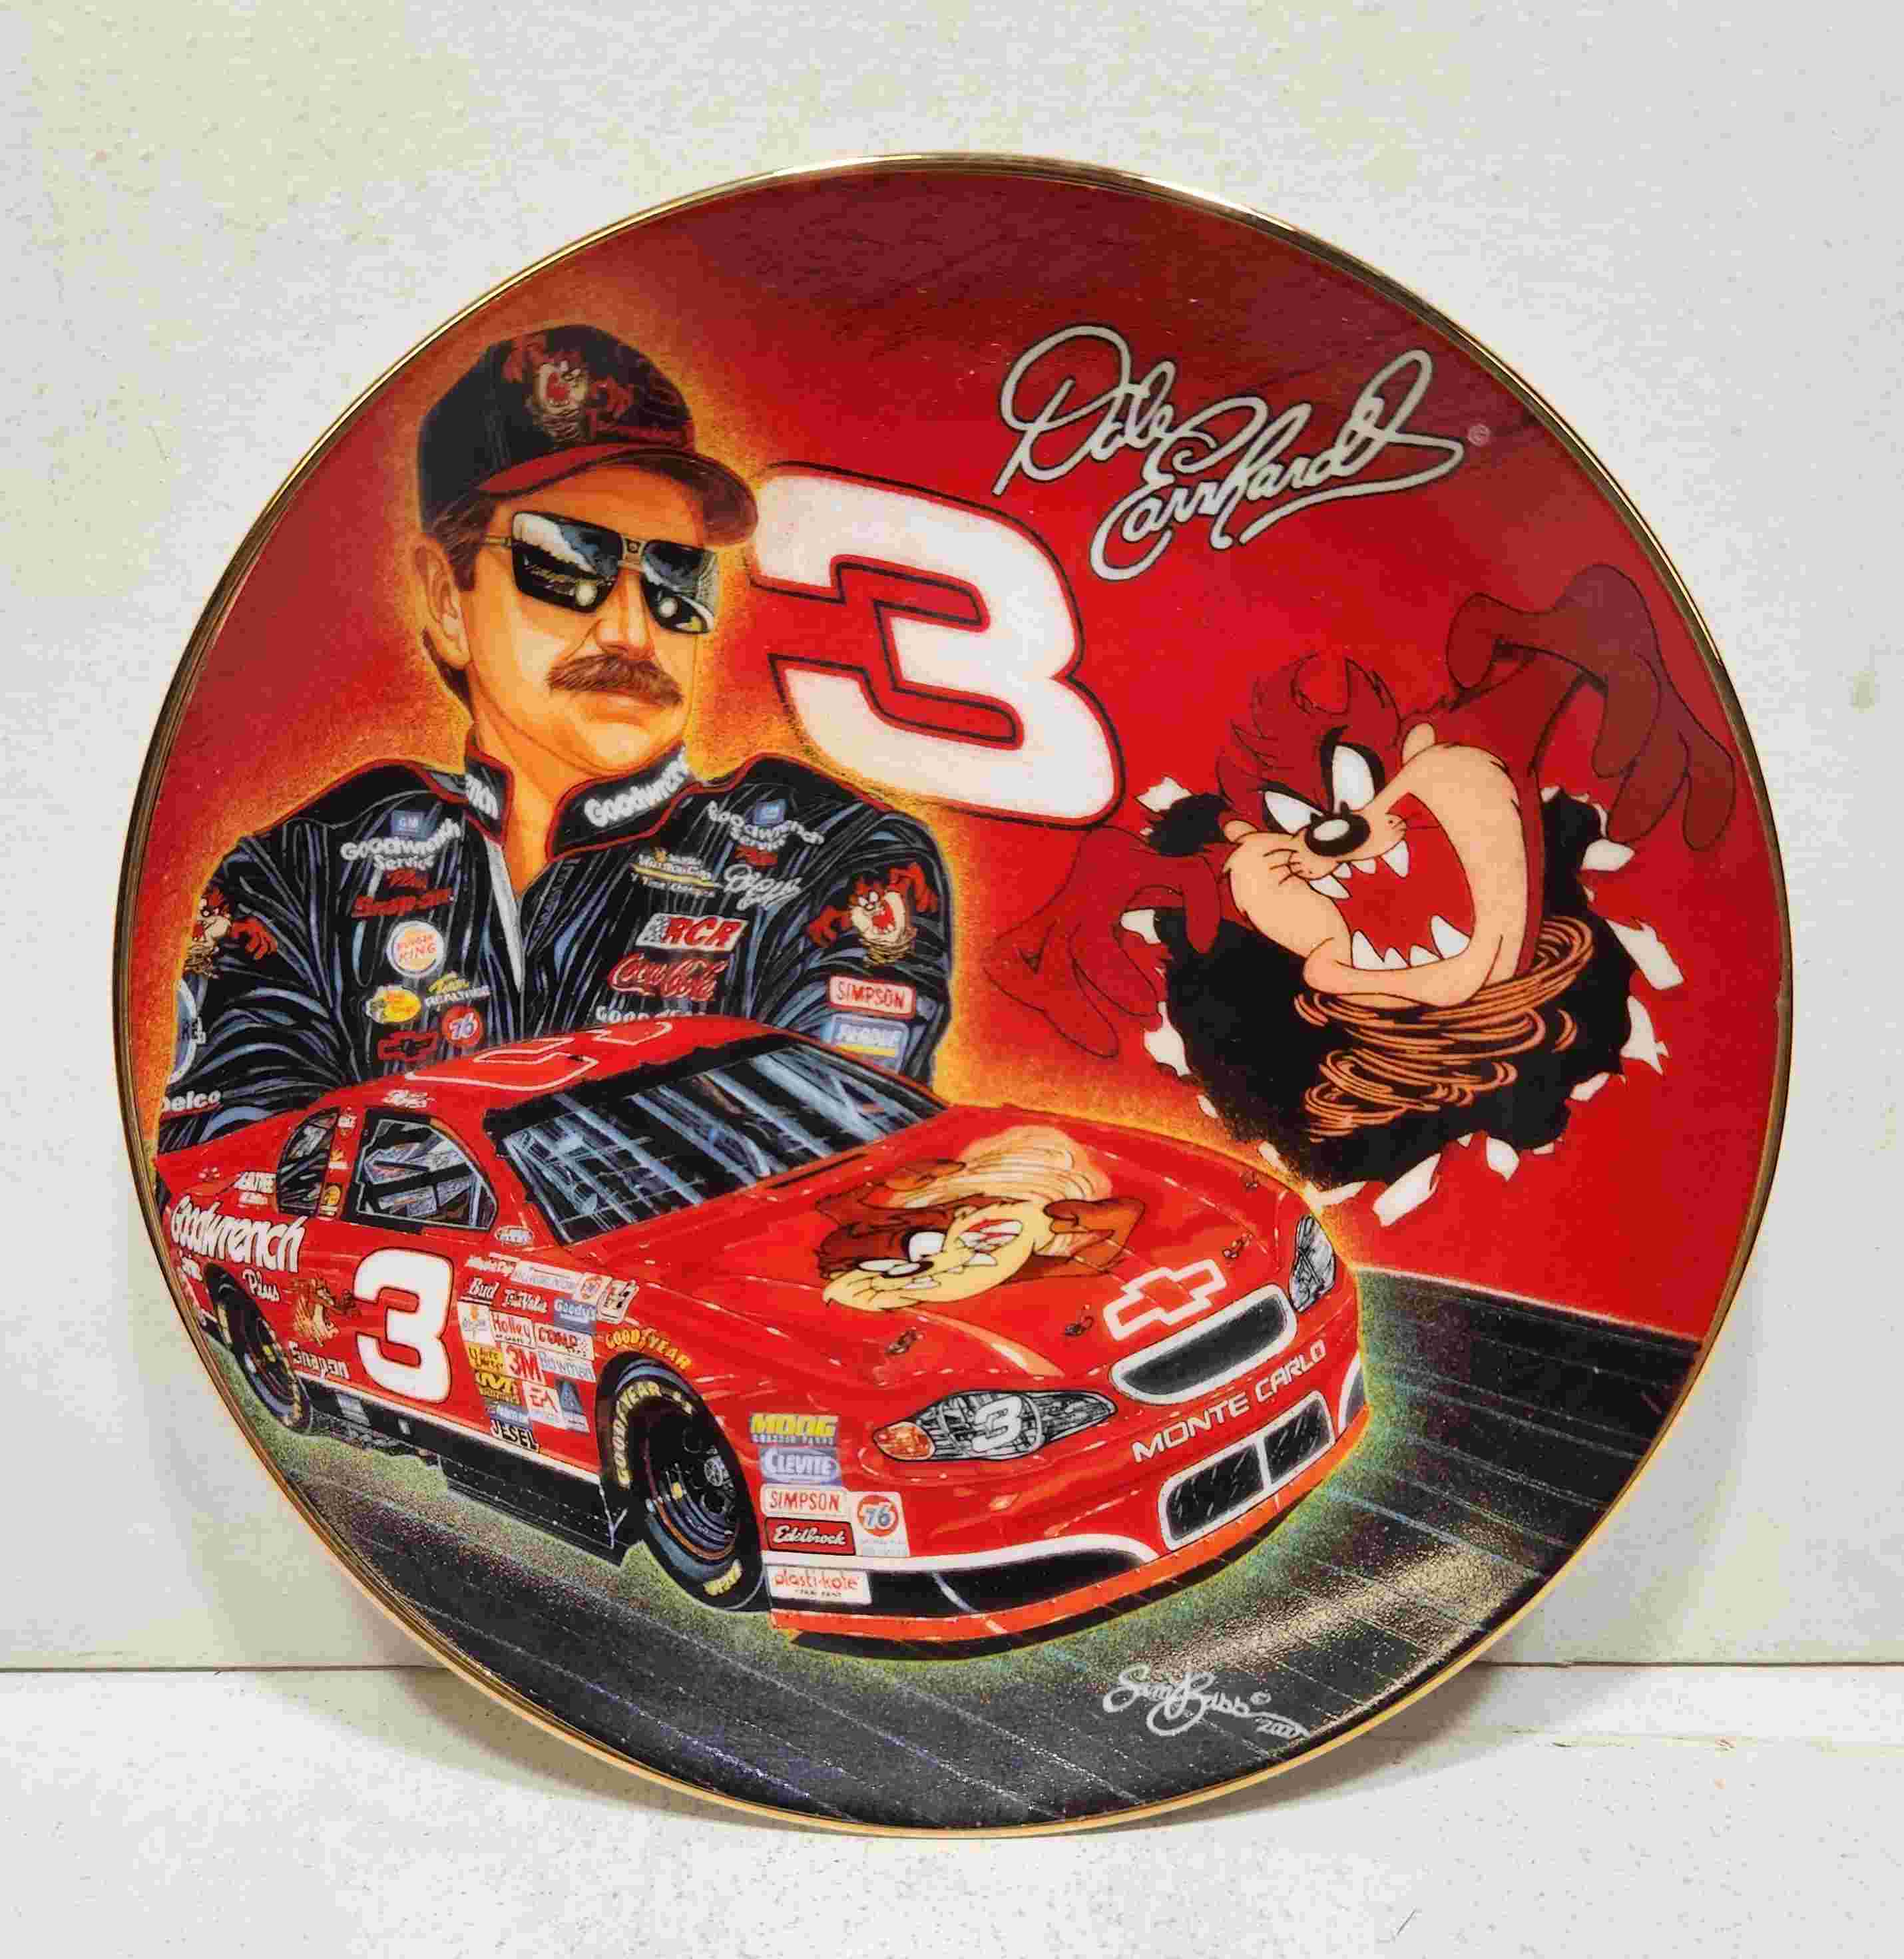 2000 Dale Earnhardt Hot Property "TAZ" by The Hamilton Collection